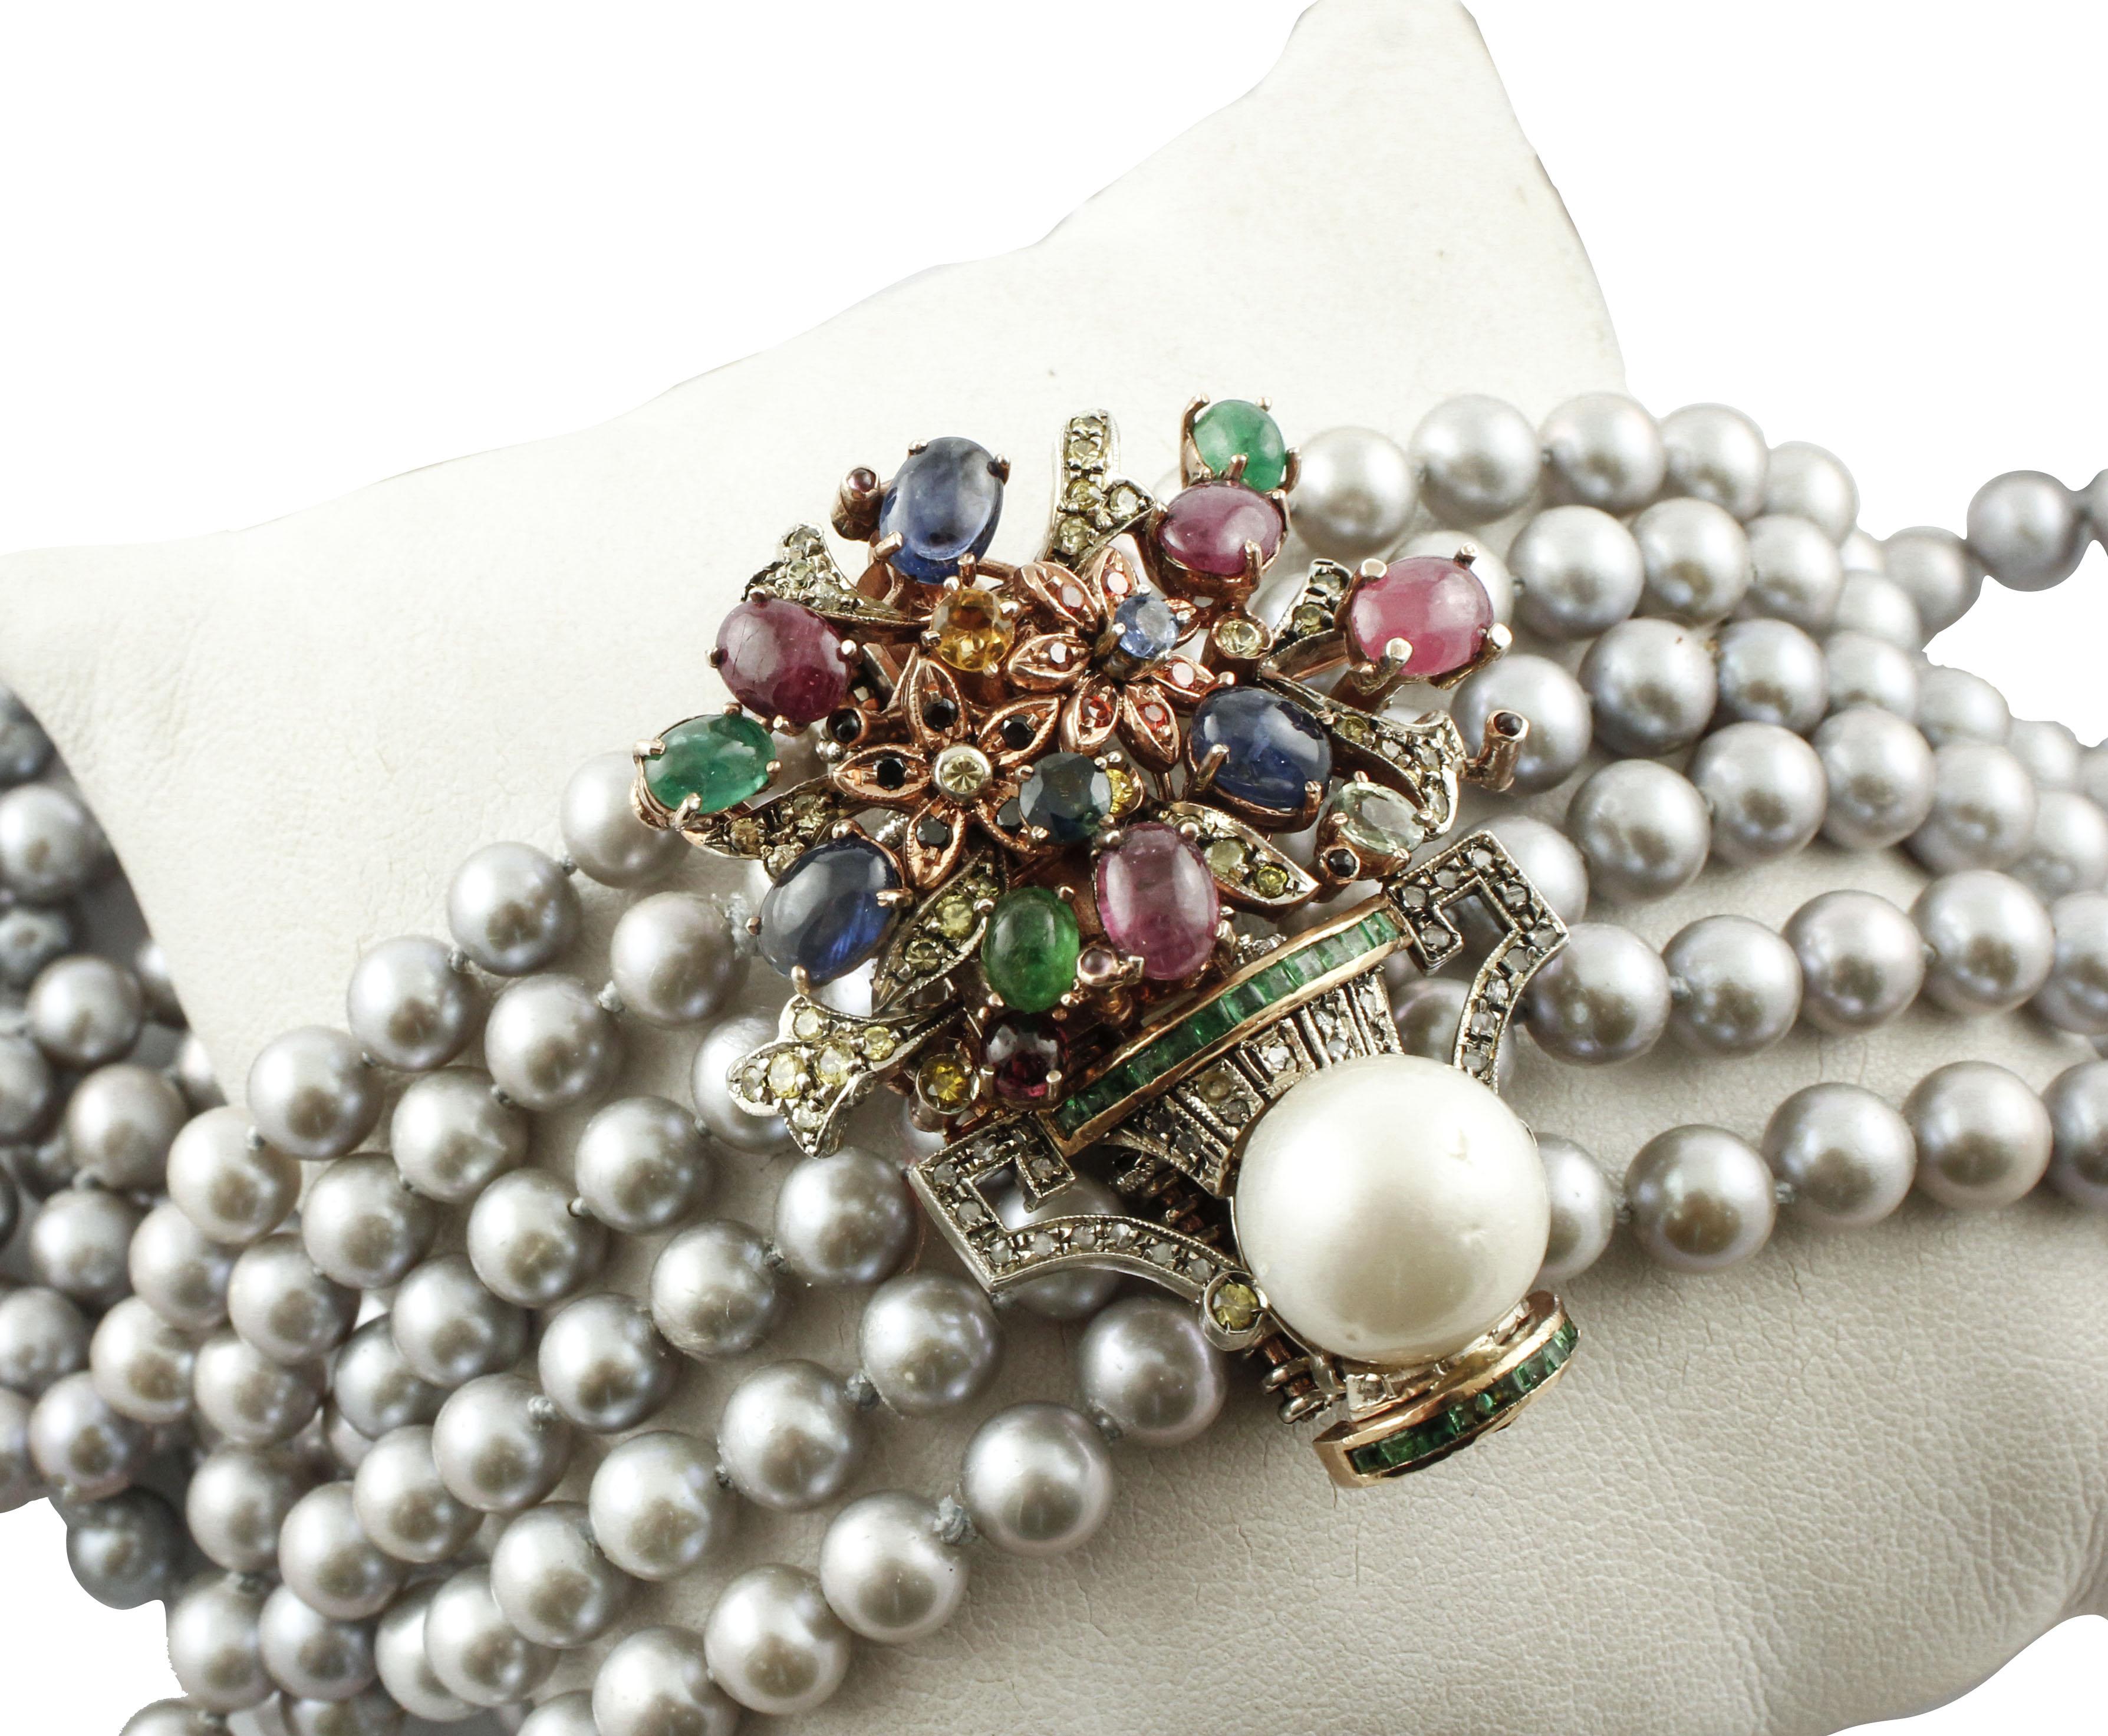 Retro Diamonds Rubies Emeralds Sapphires Stones Pearl Grey Pearl Gold Silver Necklace